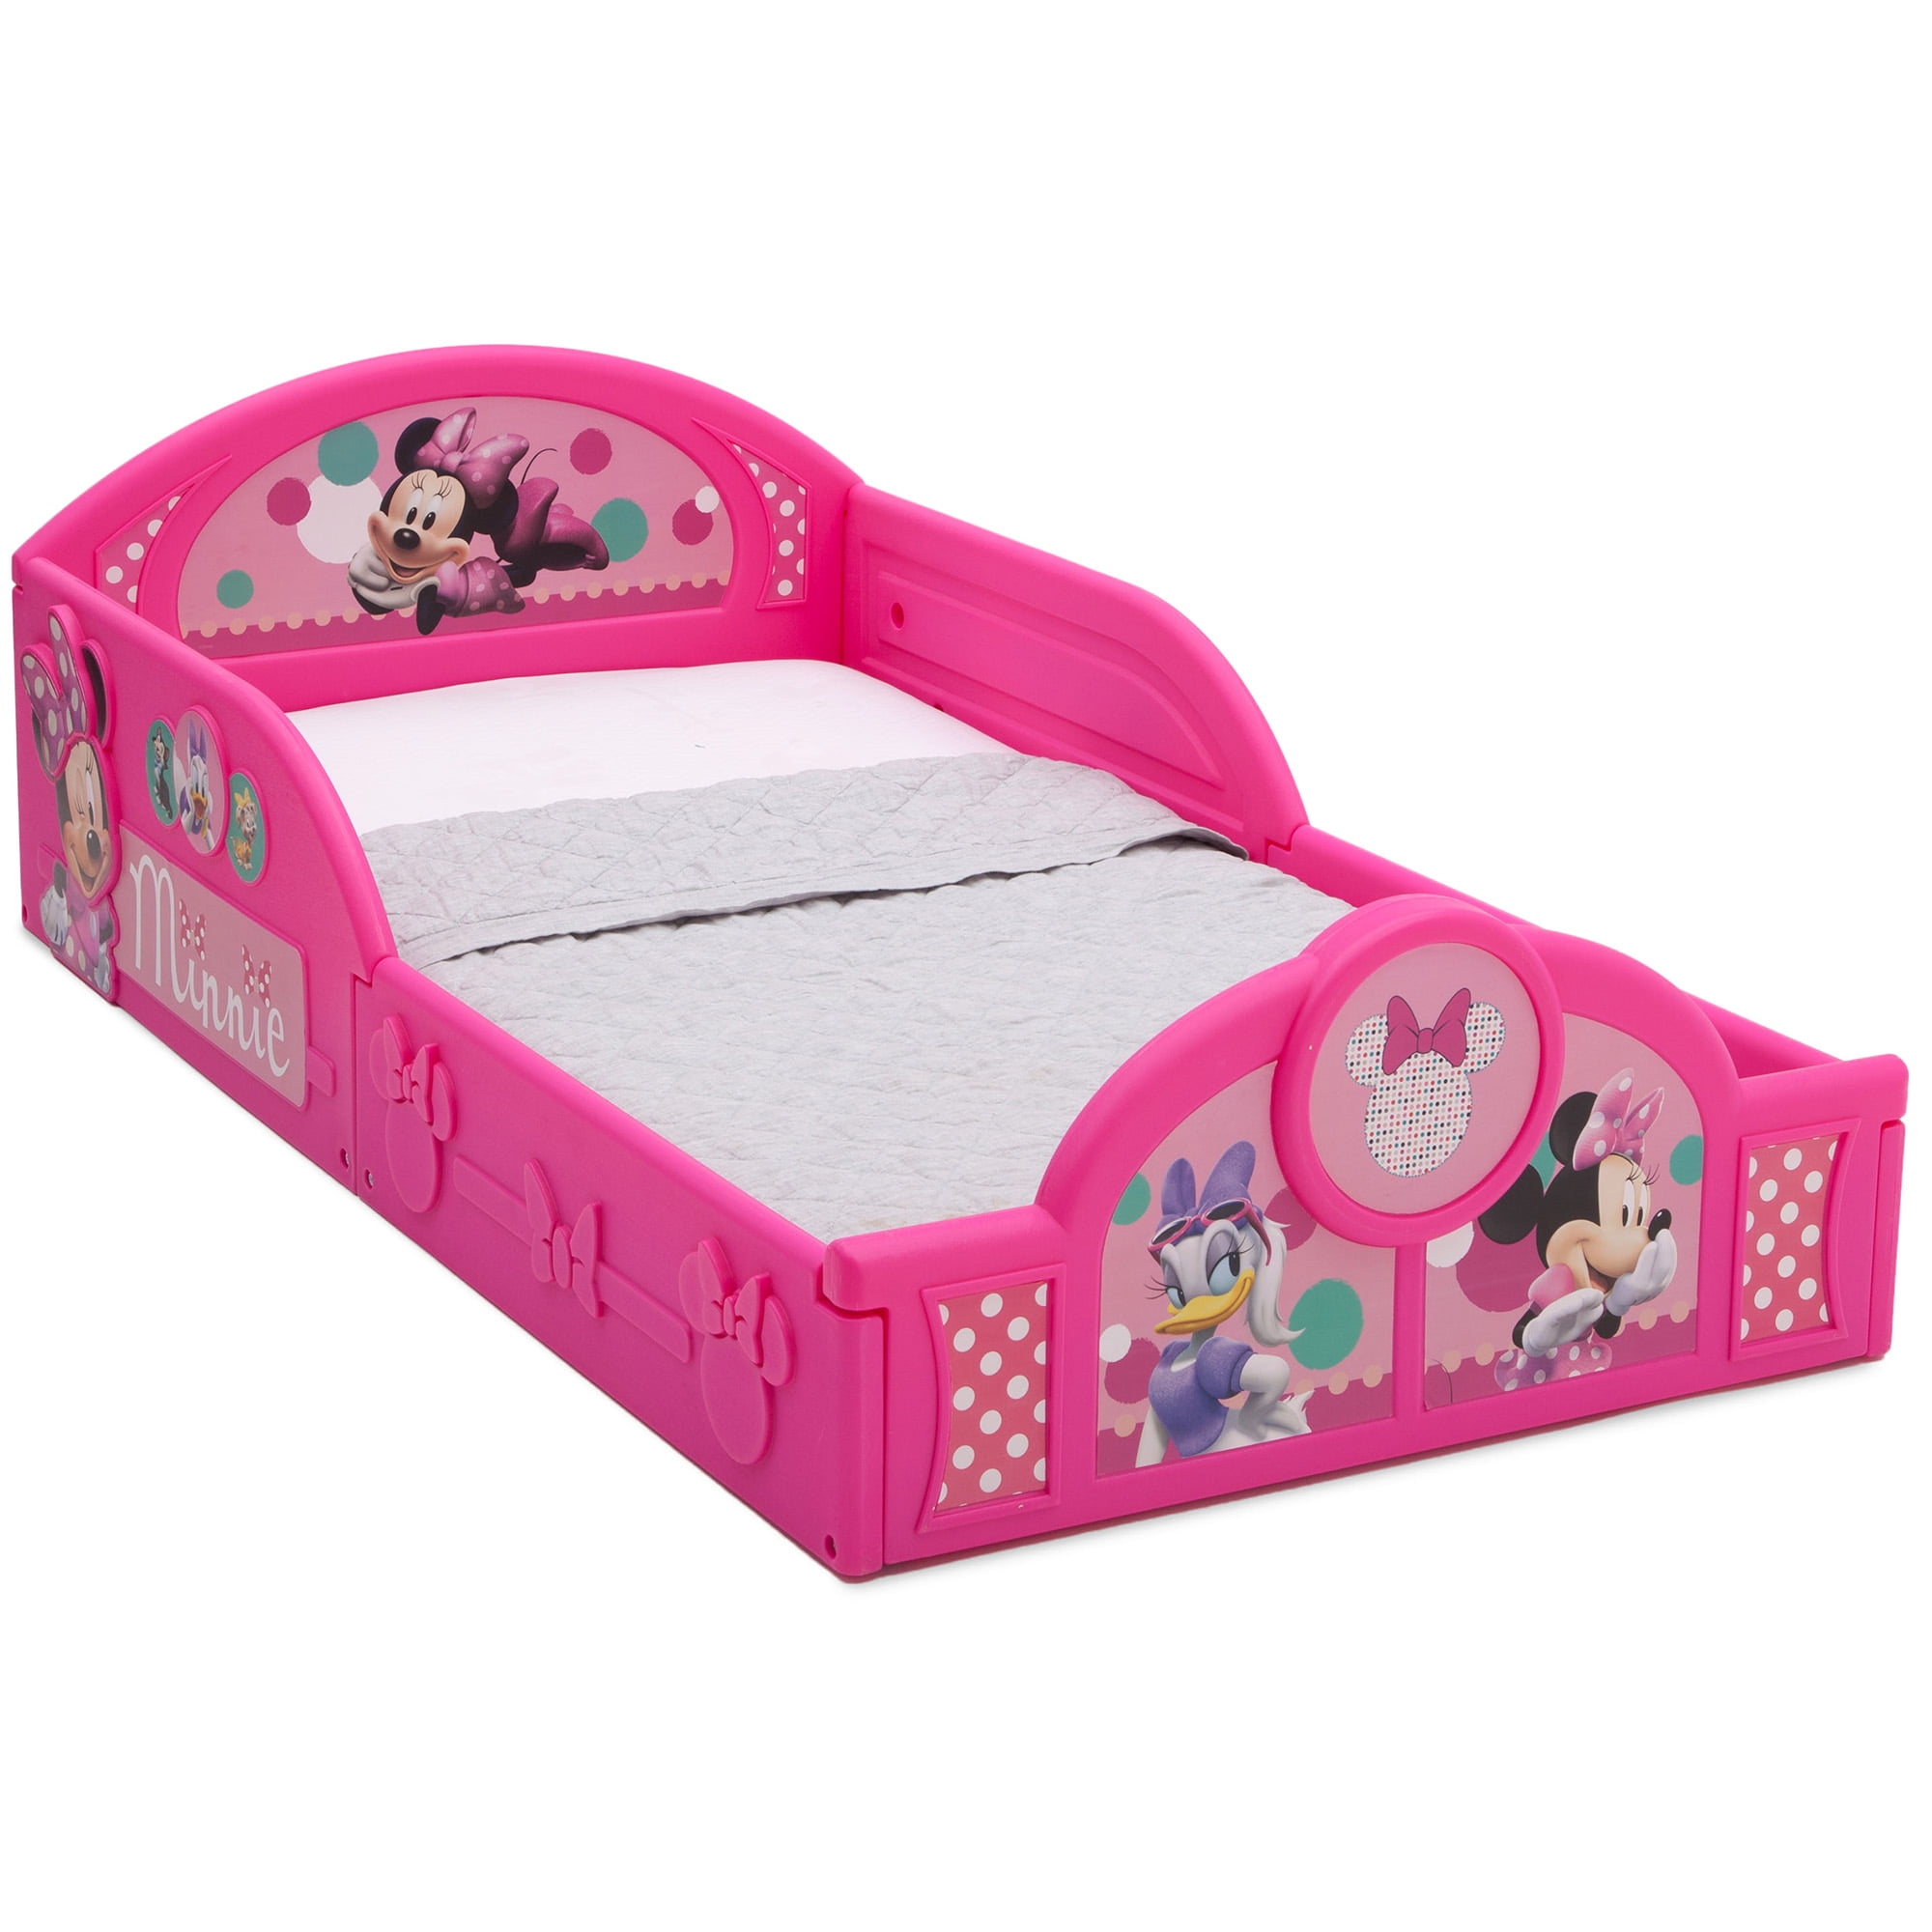 Minnie Mouse Ready Bed Kids Air Bed